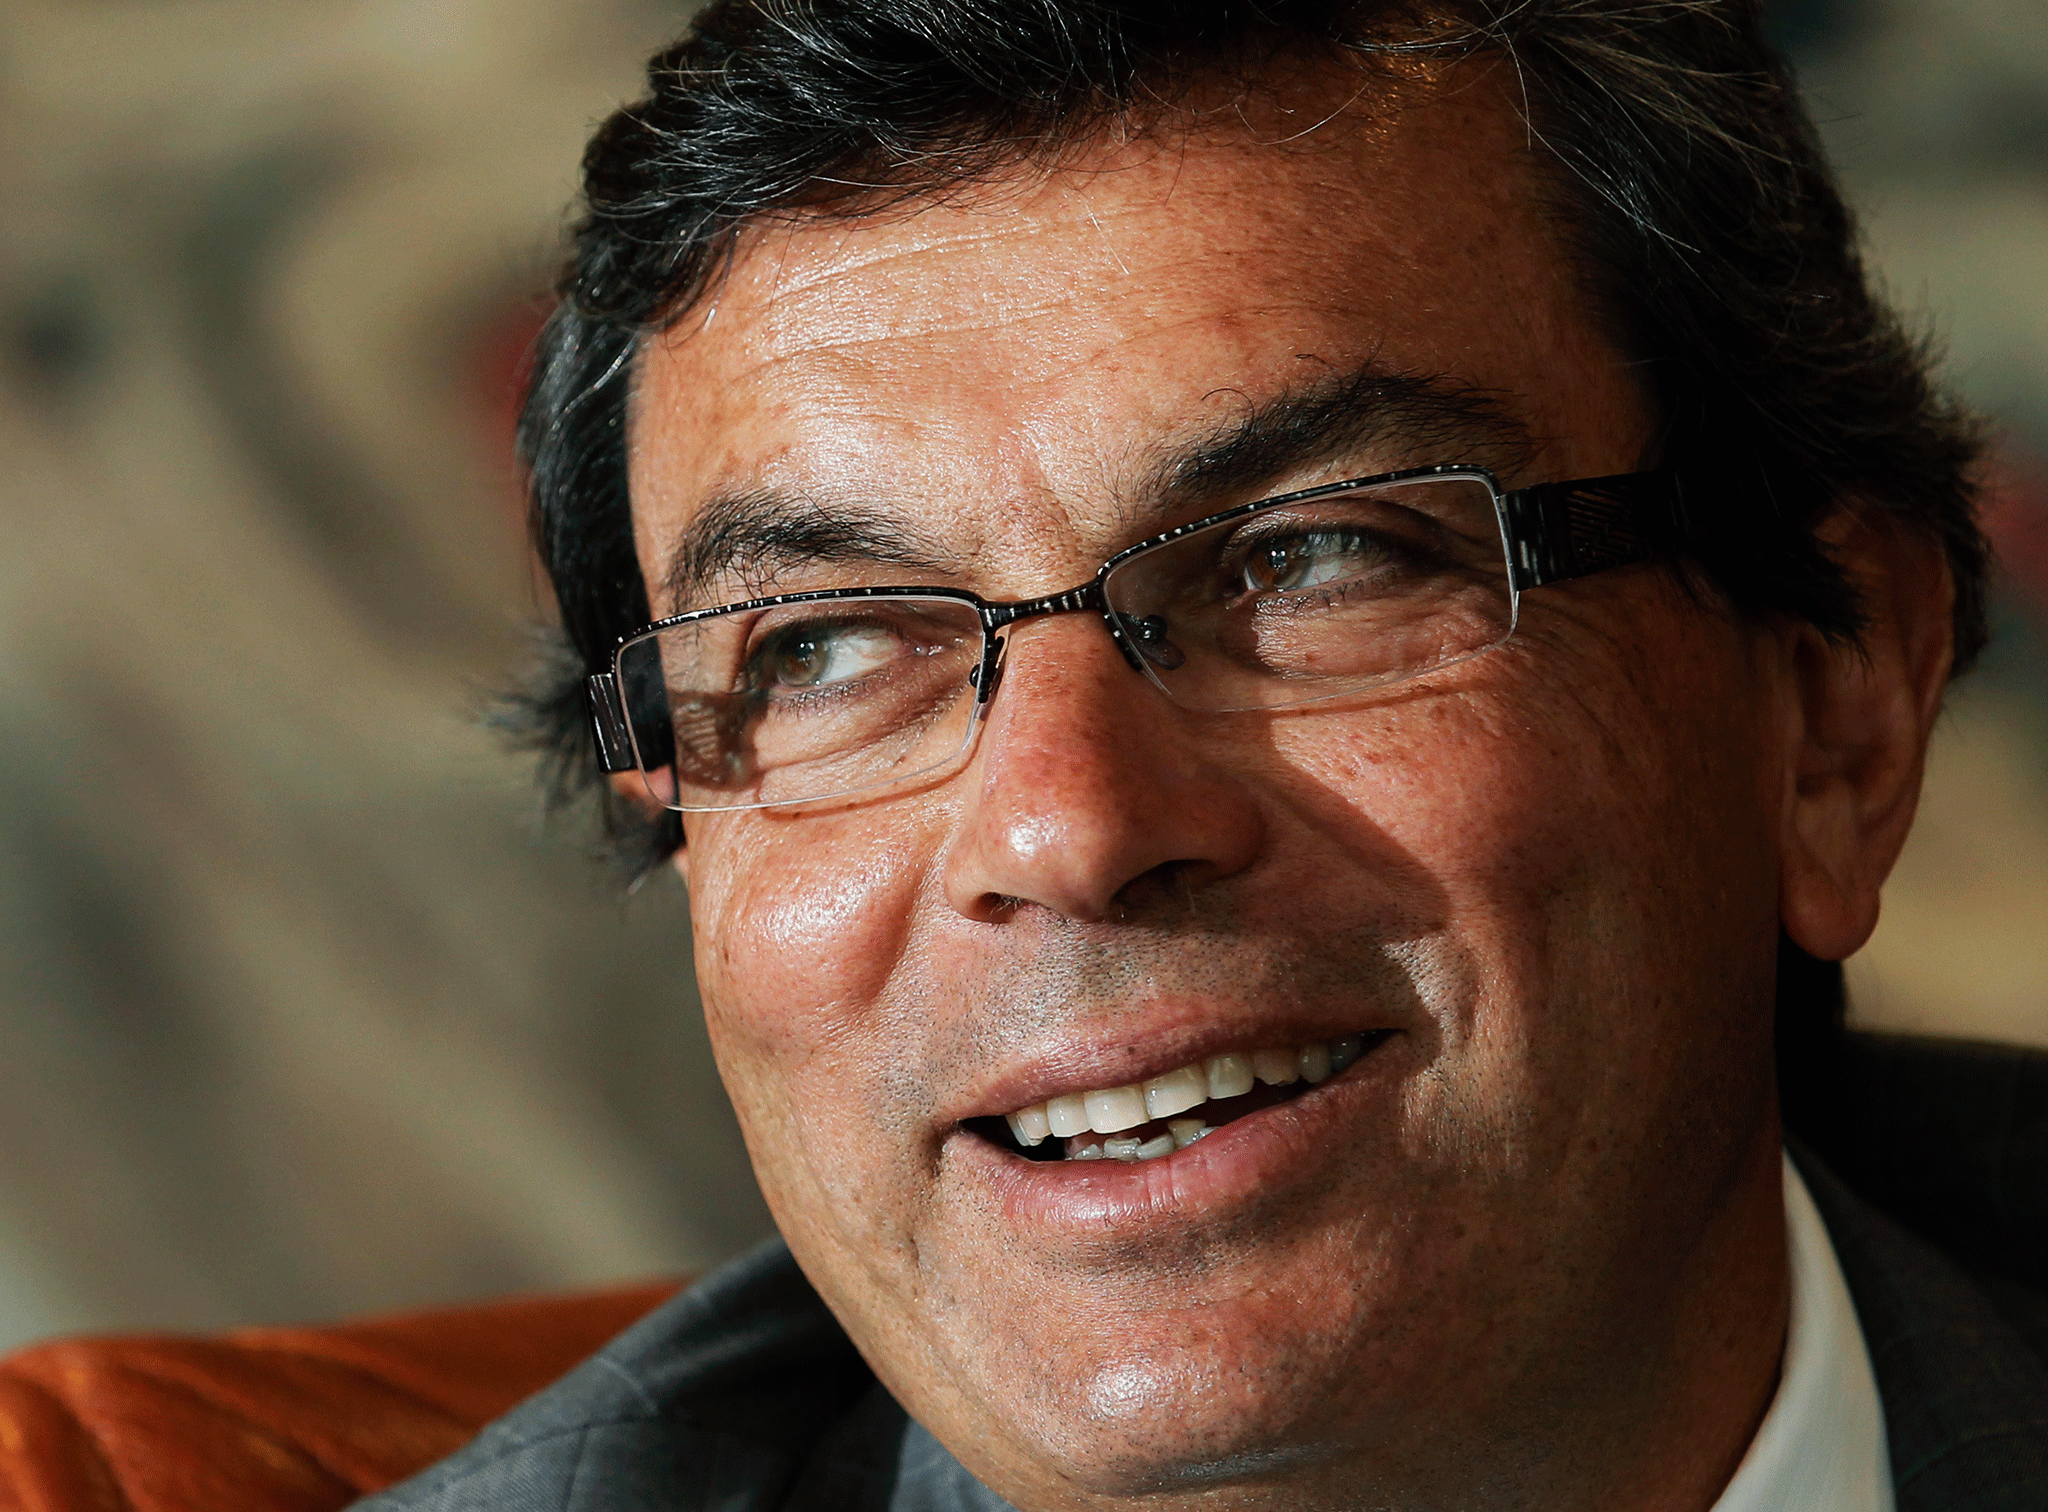 Ayman Asfari, the chief executive of Jersey-registered oil and gas firm, Petrofac